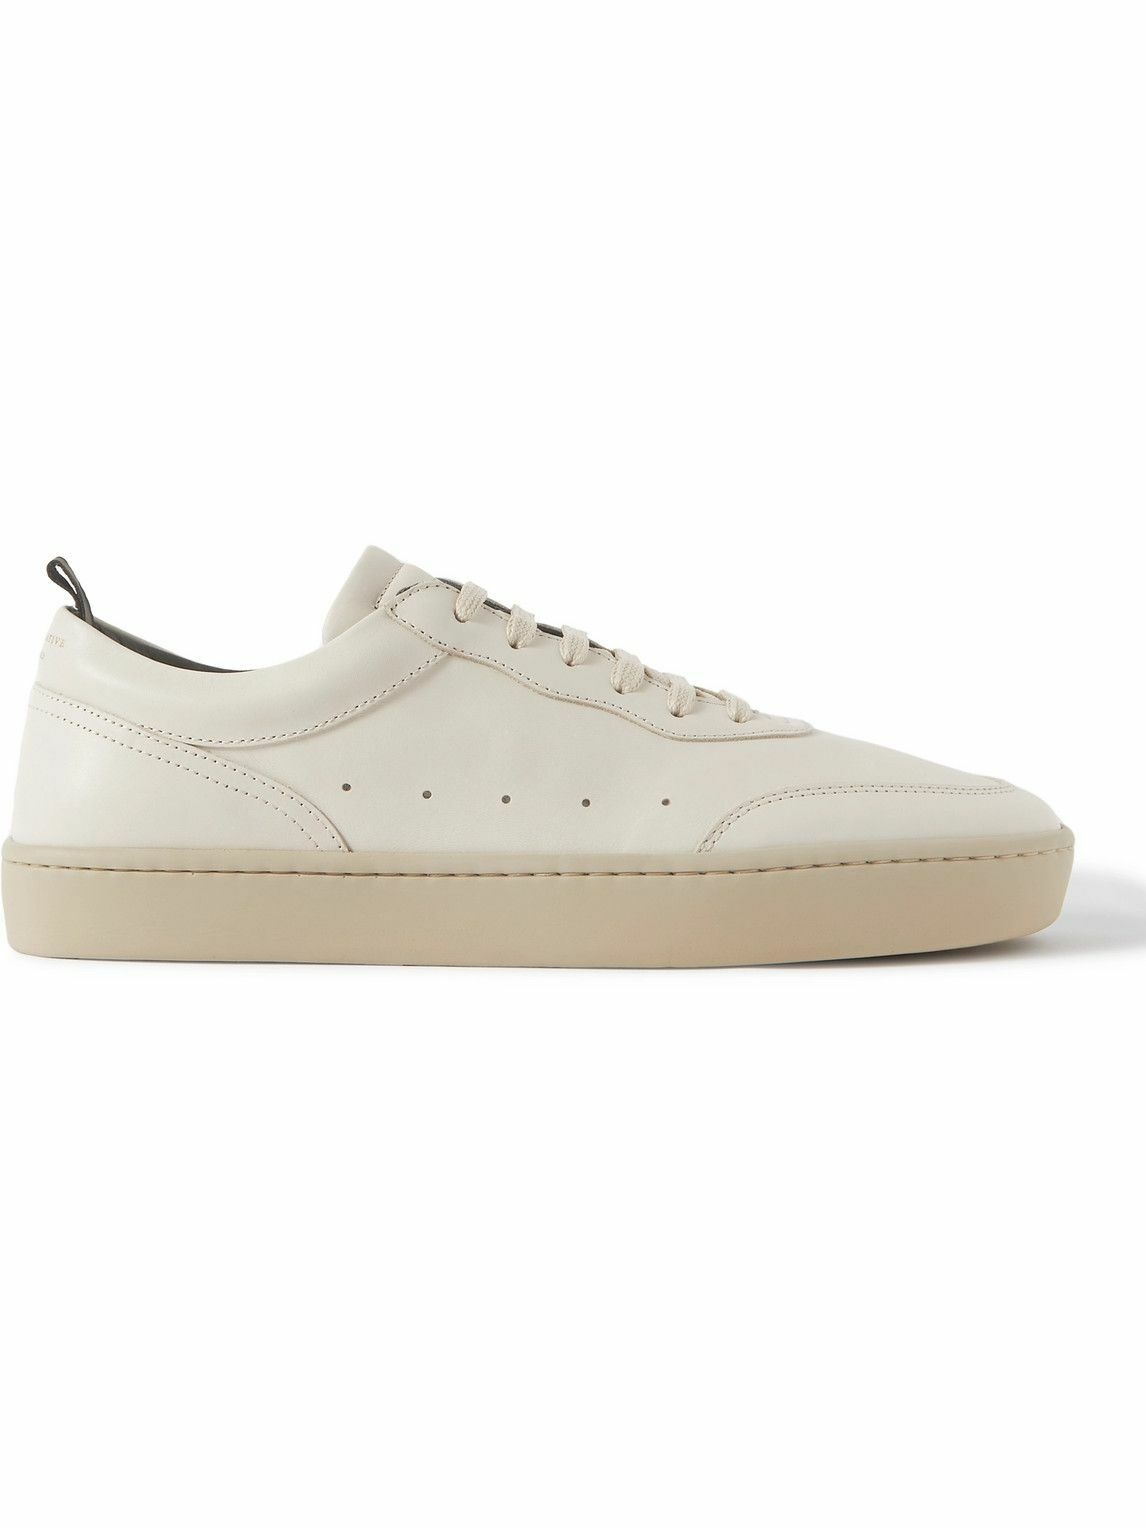 Officine Creative - Kyle Lux 001 Leather Sneakers - Neutrals Officine ...